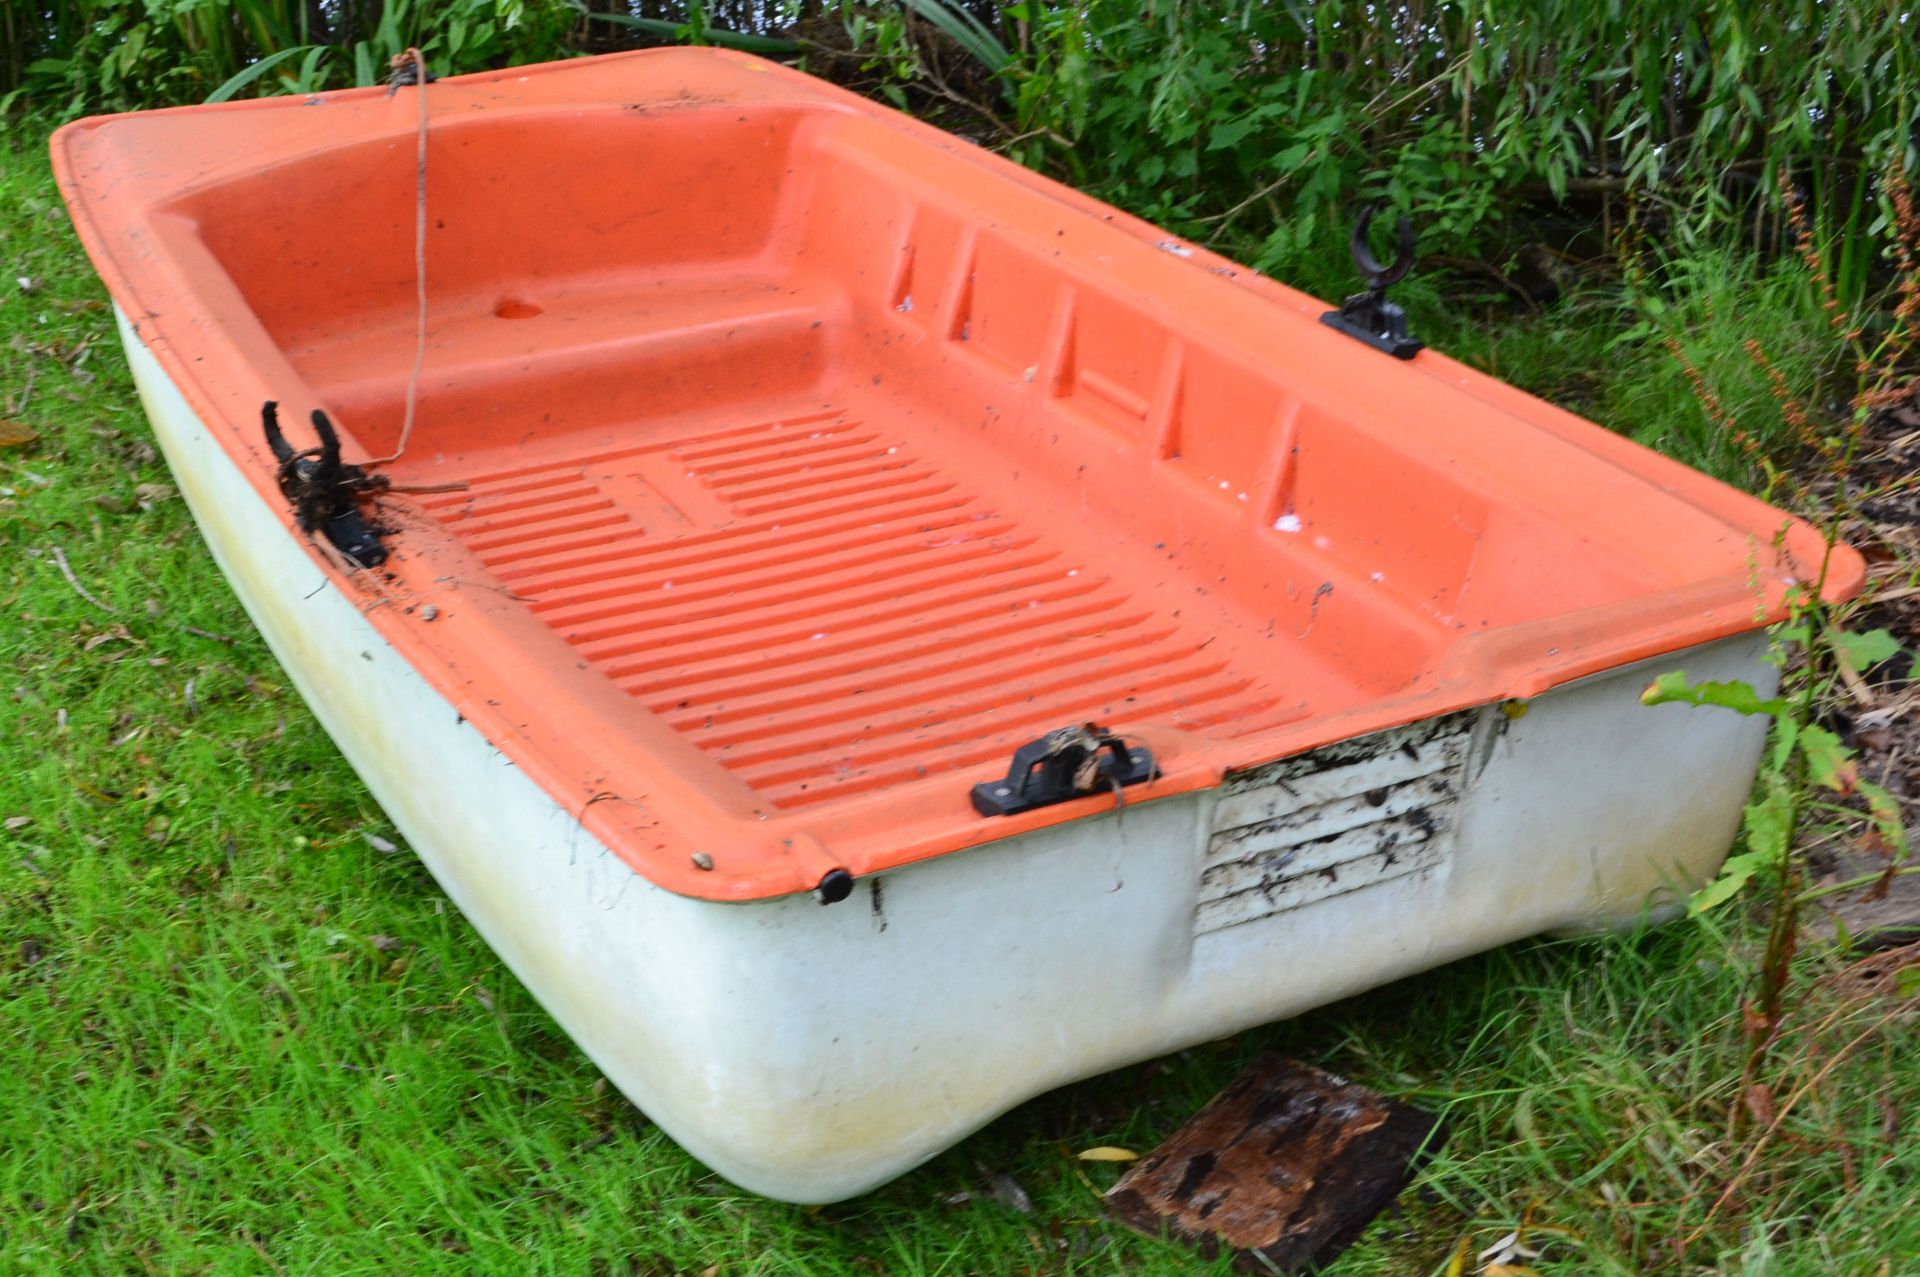 1 x Bic Z5Z-B Boat/Dinghy - CL226 - Location: Knutsford WA16 - NO VAT ON THE HAMMER Measurements: - Image 13 of 14